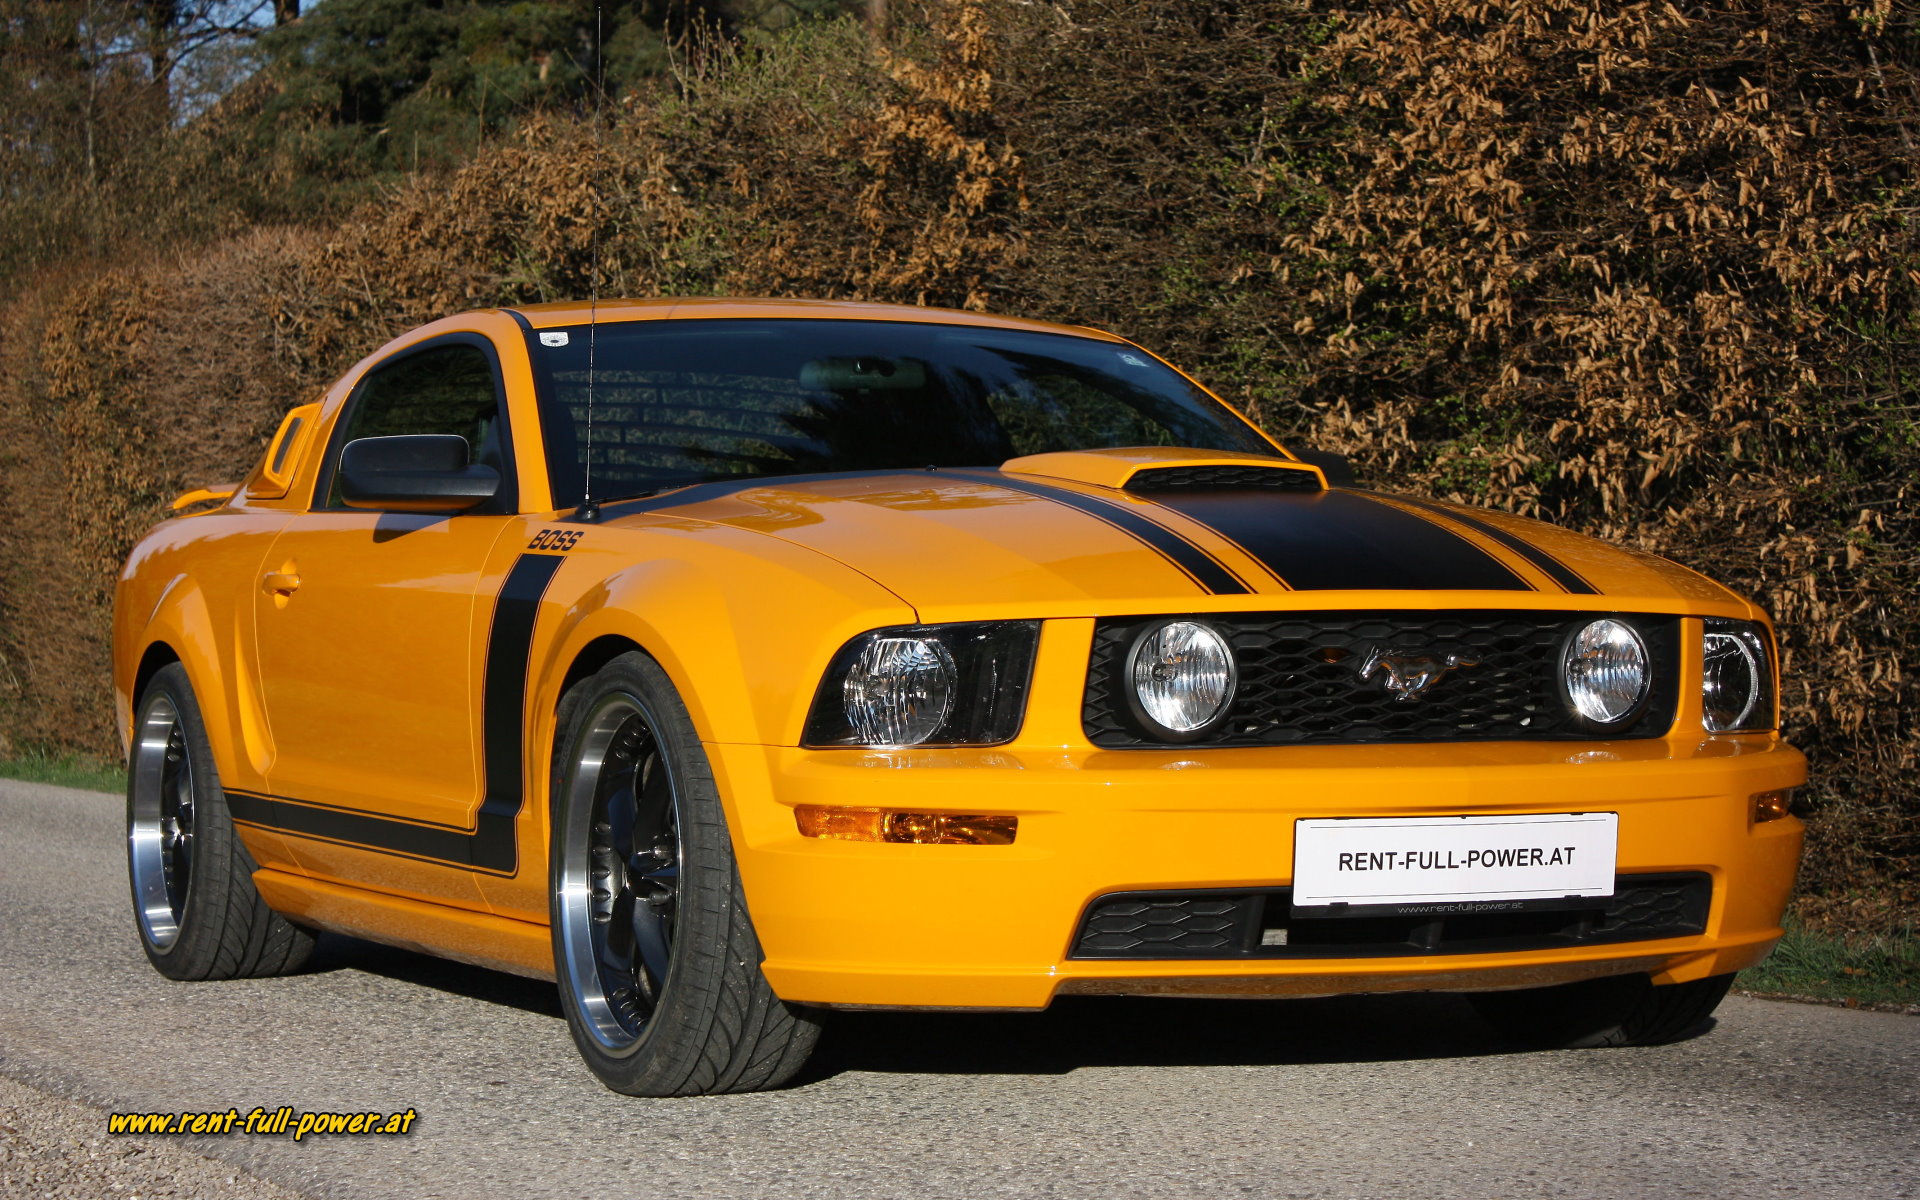 Ford Mustang GT US cars gallery